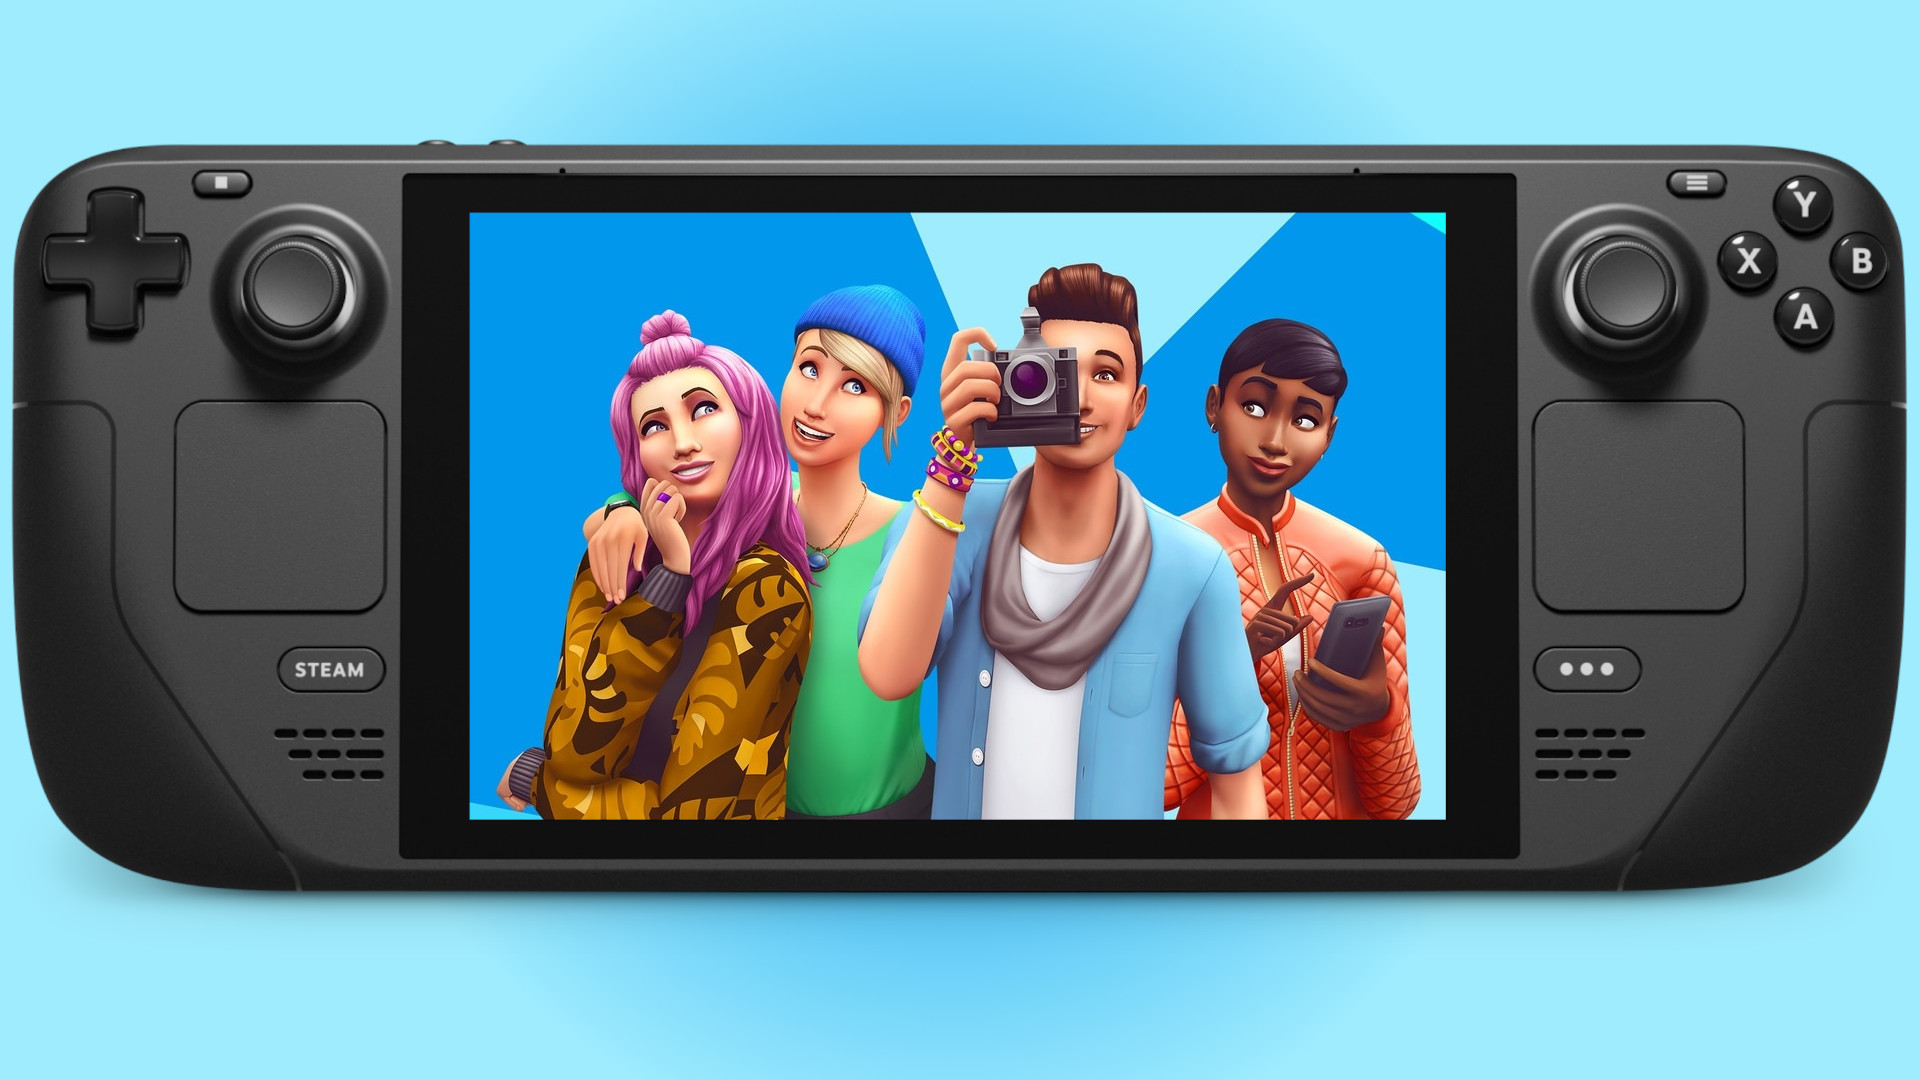 The Sims 4 and other EA games return to Steam Deck thanks to Valve